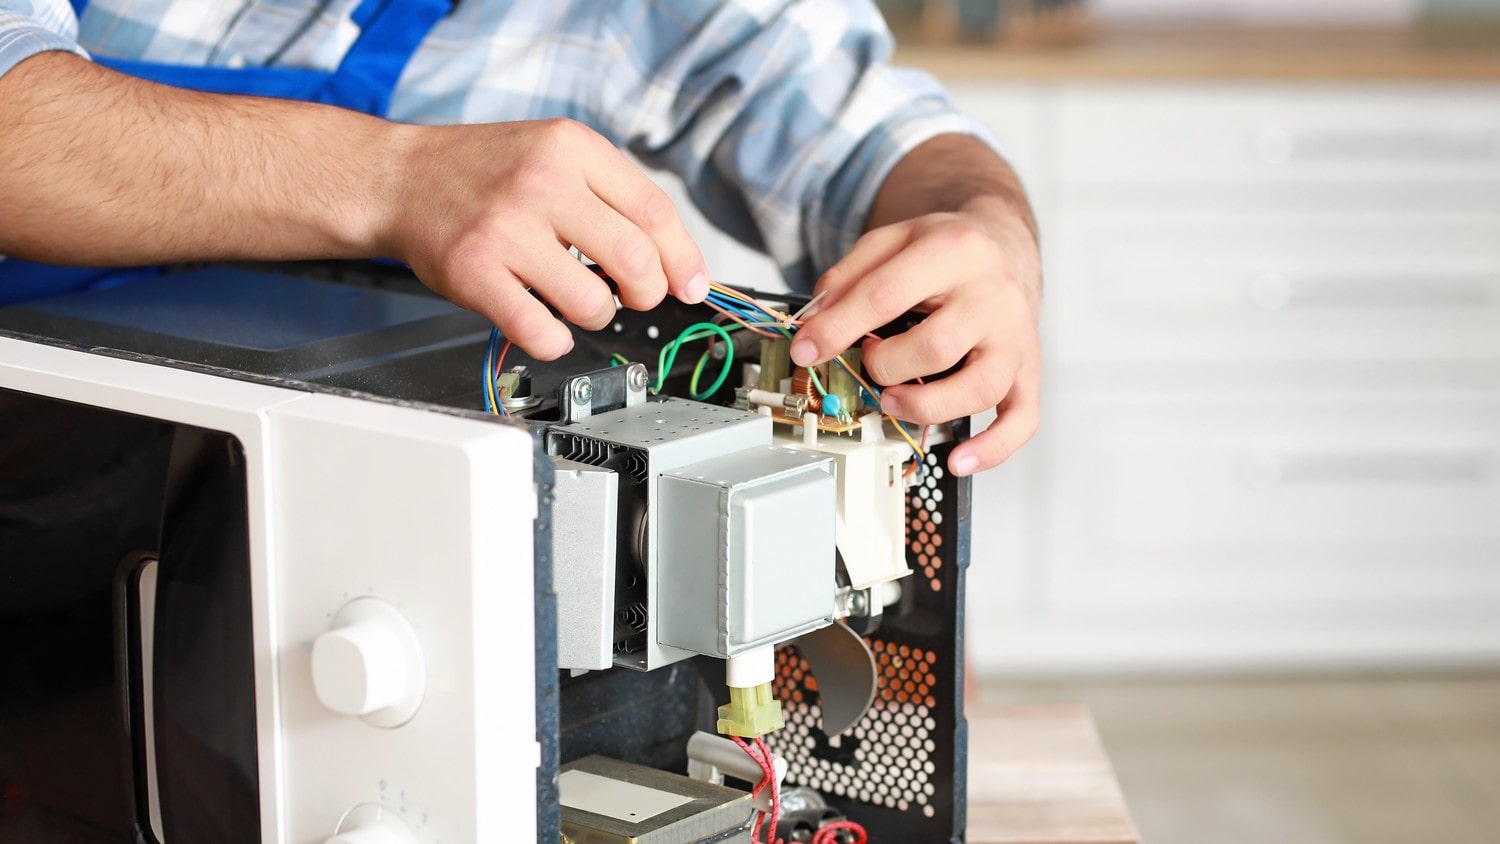 A close-up of a technician repairing a microwave, with tools and wires scattered around.